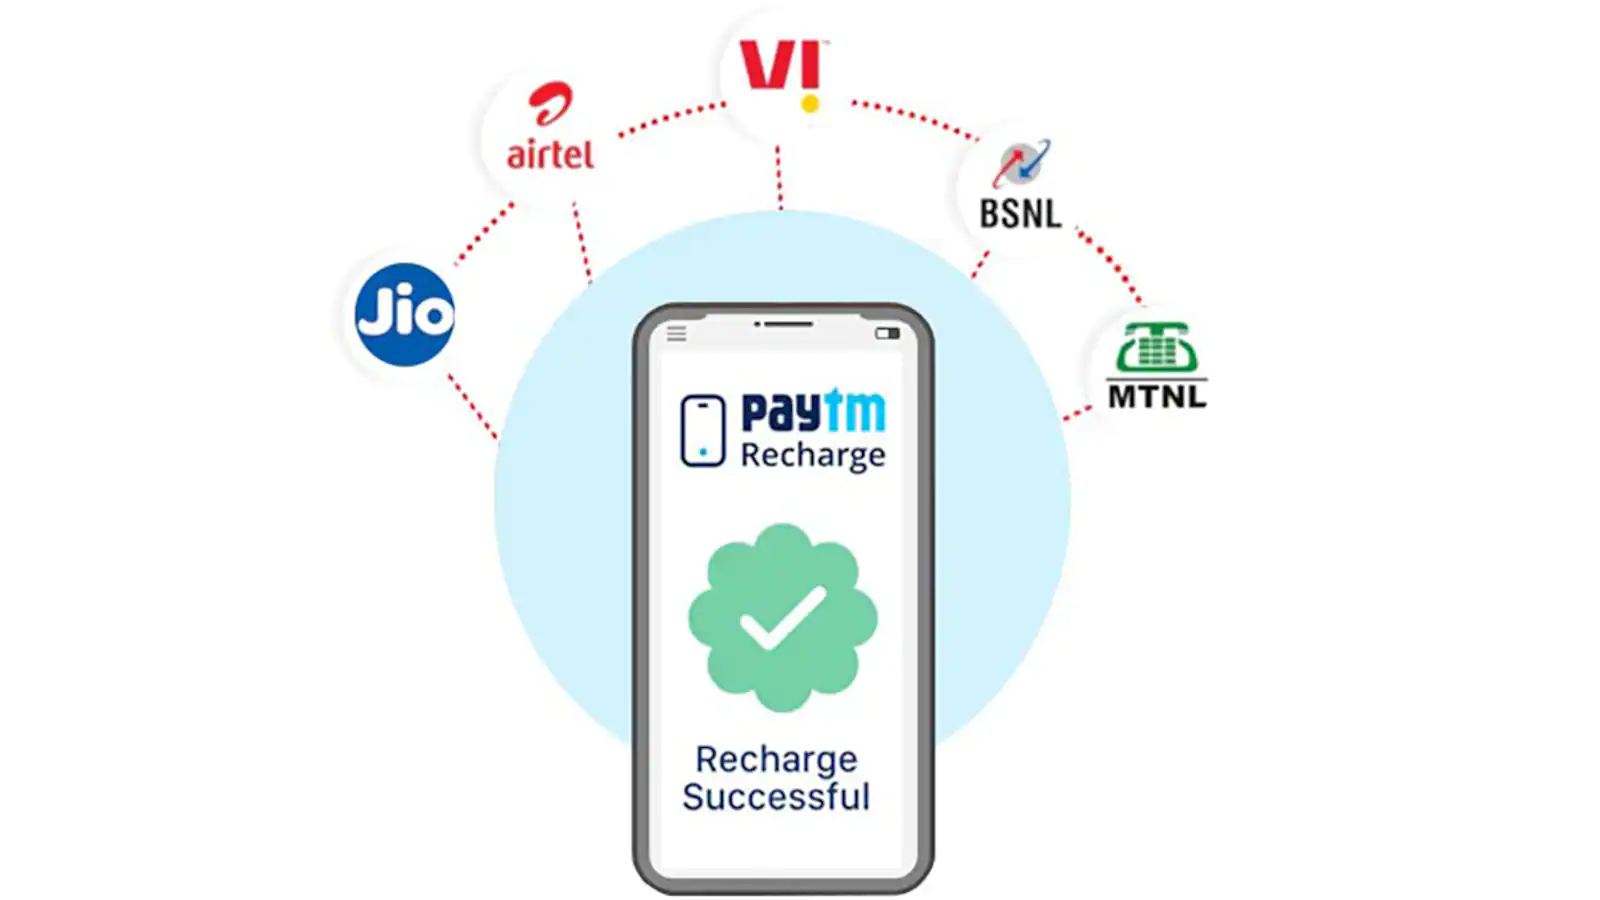 Paytm is testing out surcharge on mobile recharges